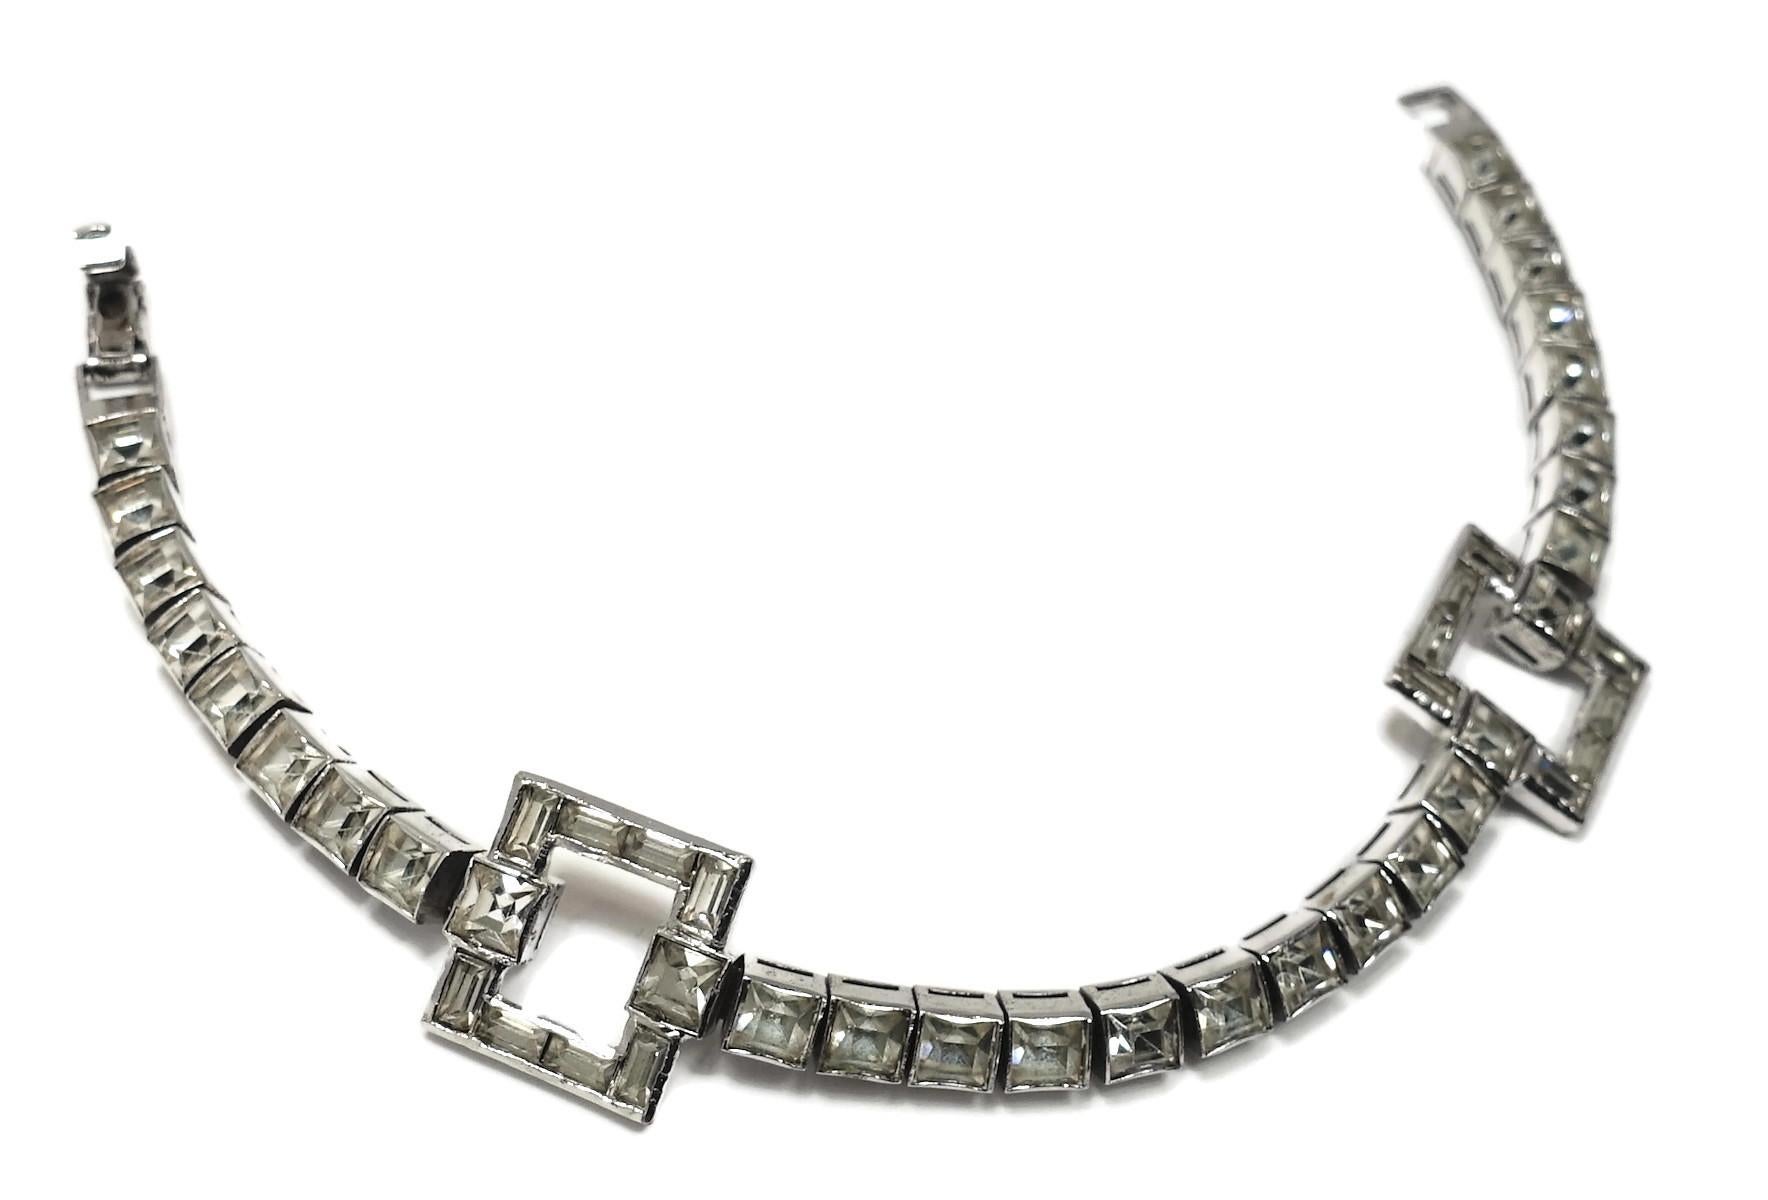 This 1950s vintage retro bracelet features clear crystals in a rhodium silver tone setting.  In excellent condition, this bracelet measures 7” x 5/8” with a fold-over clasp.